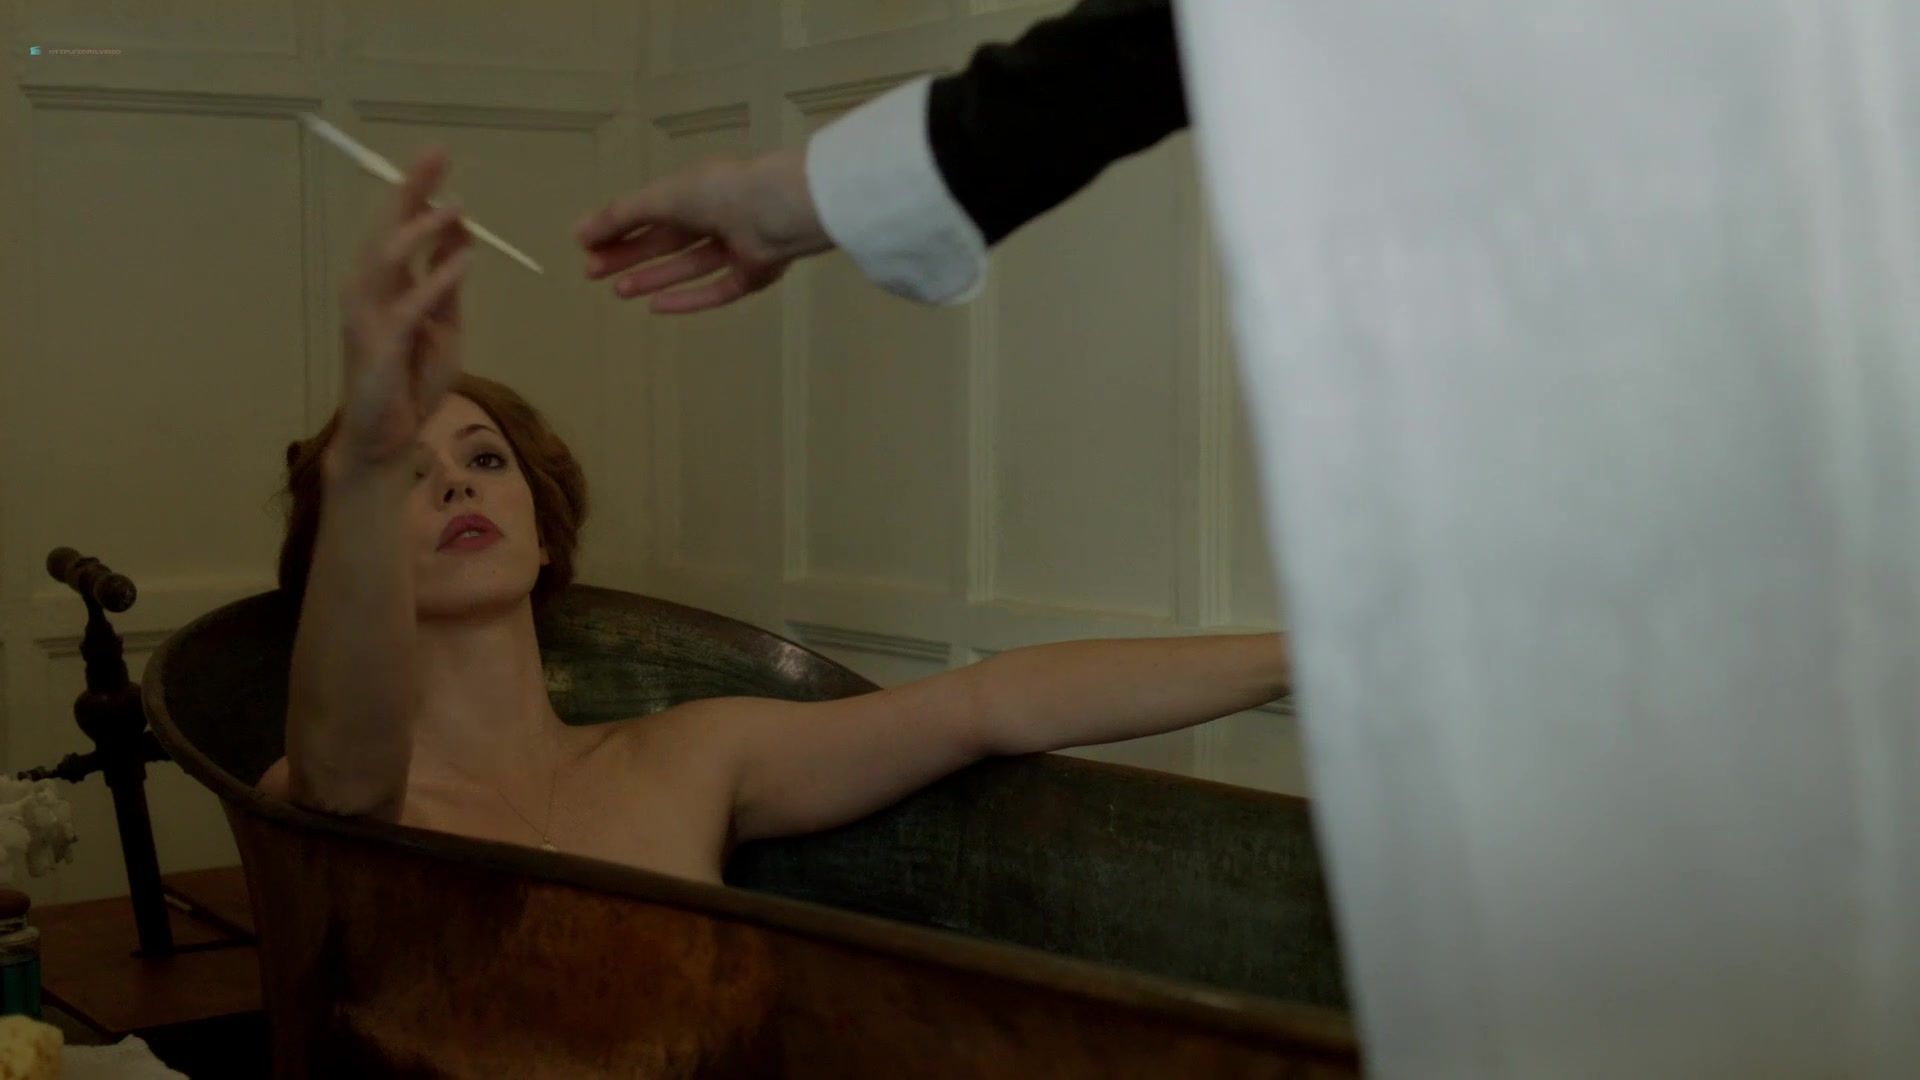 Sextoys Rebecca Hall, Adelaide Clemens naked - Parades End (2012) Anal Sex